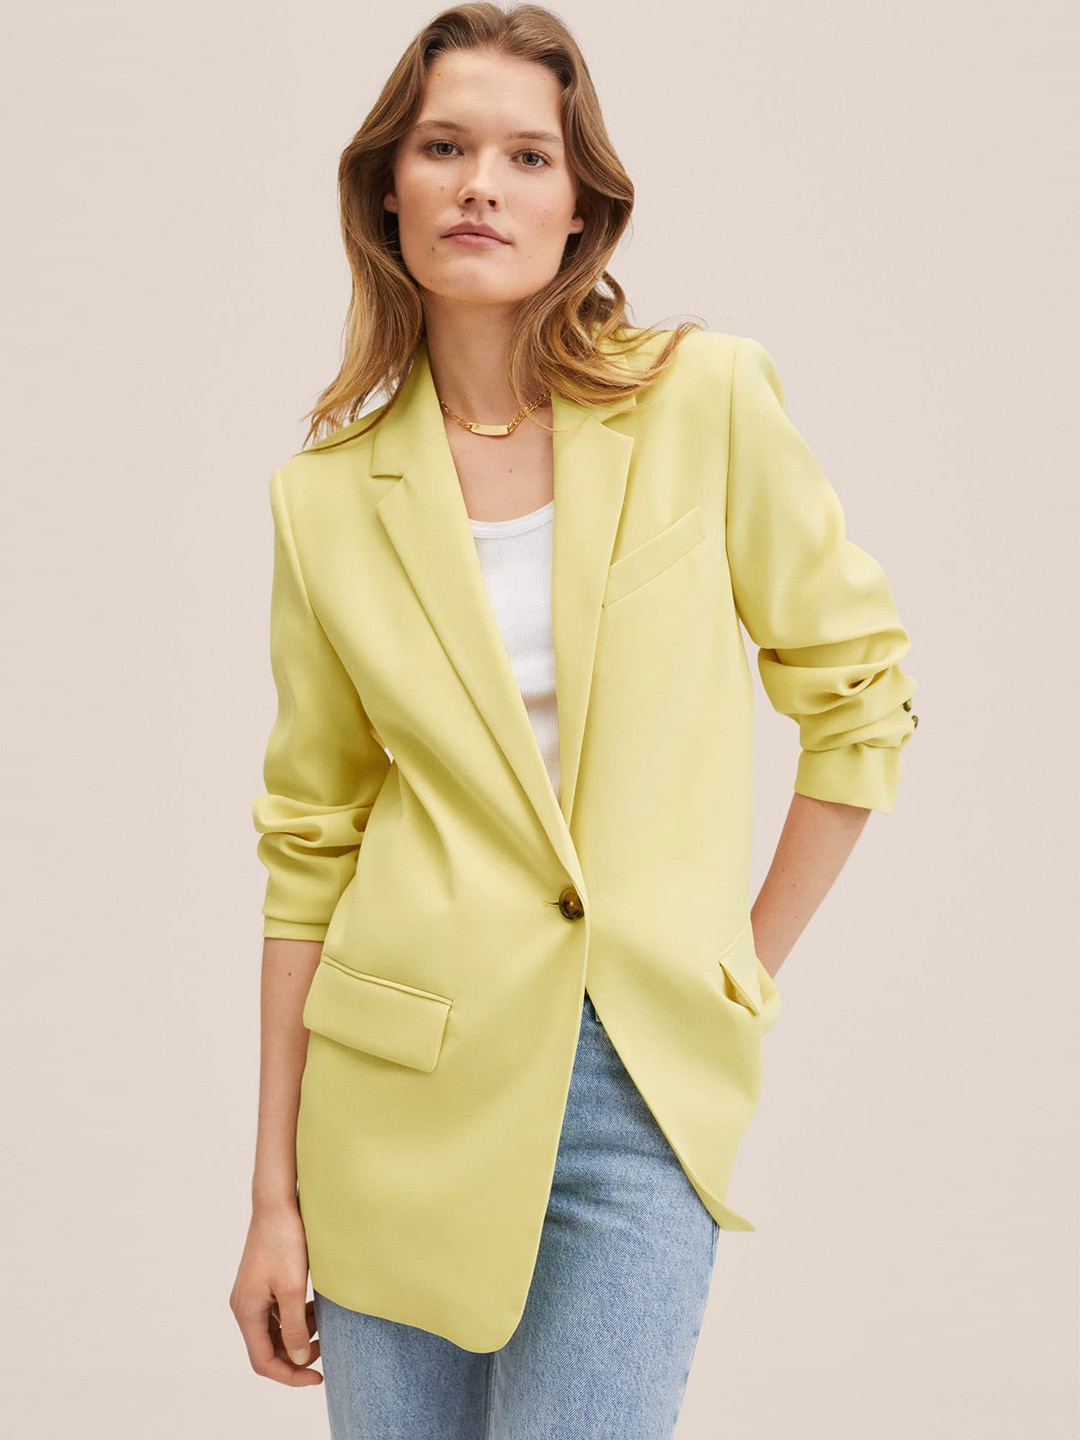 MANGO Women Yellow Single-Breasted Solid Long Design Blazer Price in India